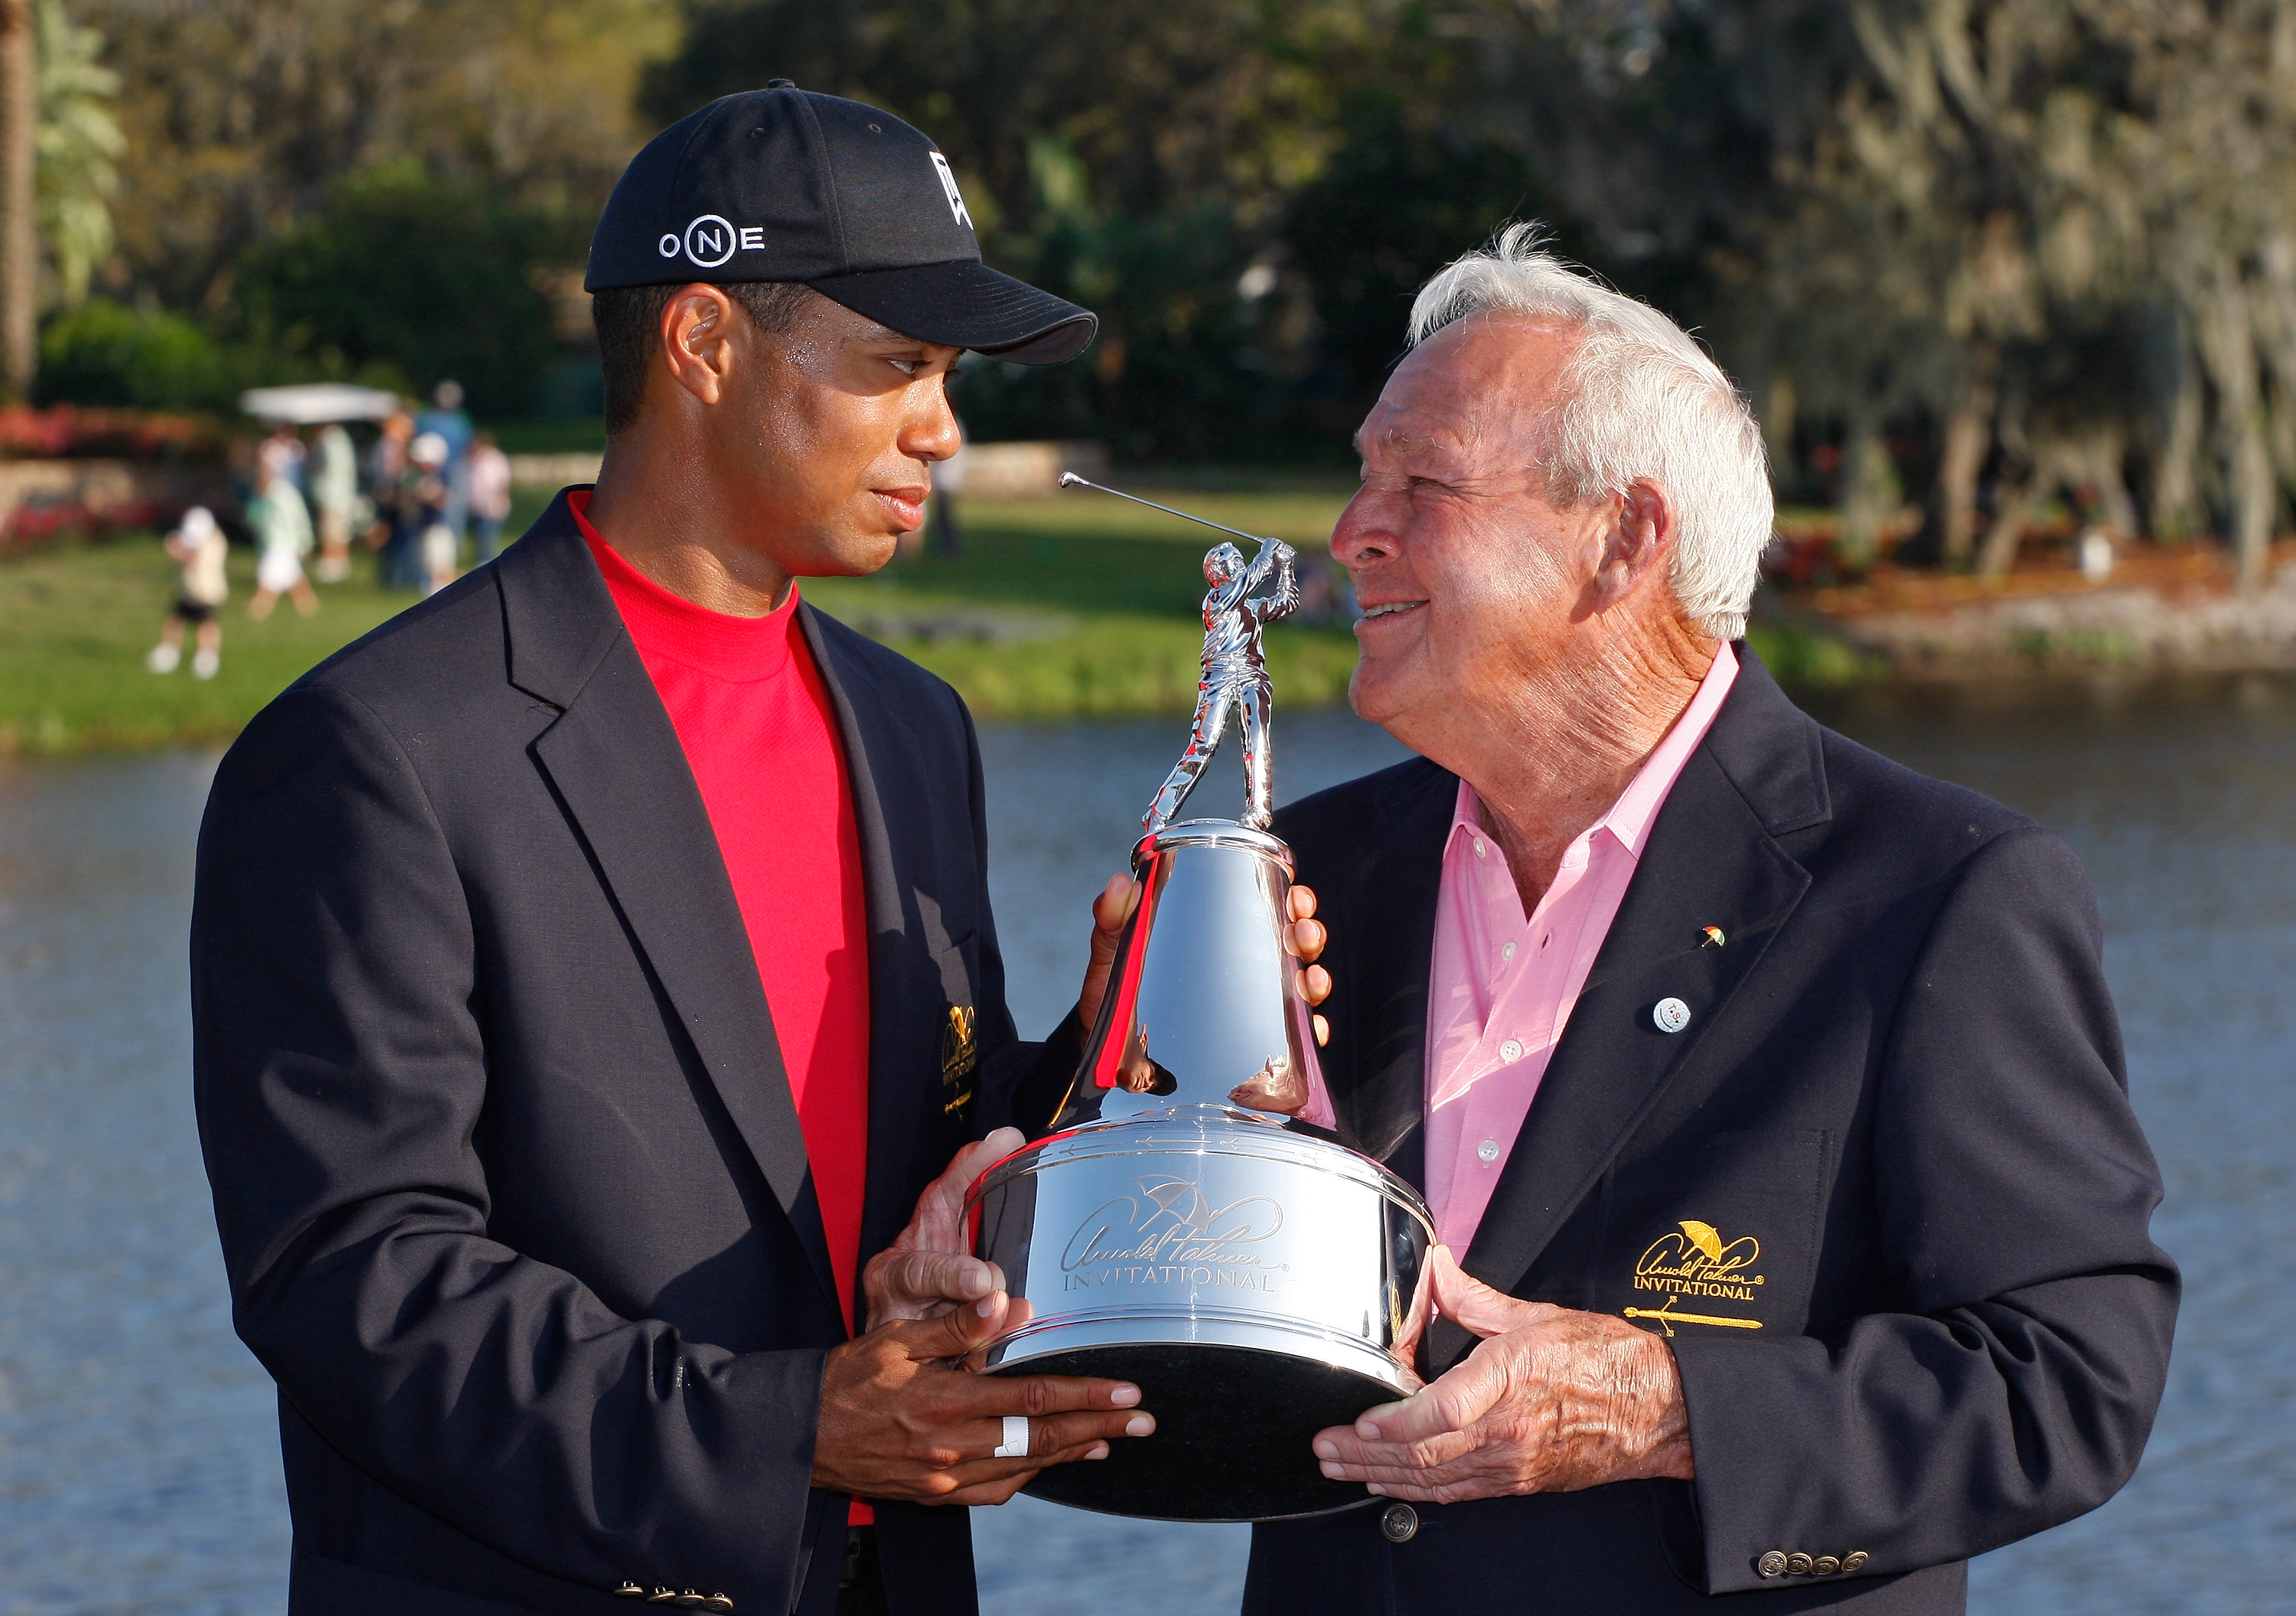 Tiger Woods poses with the winners trophy and Arnold Palmer after his victory in the Arnold Palmer Invitational presented by MasterCard held on March 16, 2008 at Bay Hill Golf Club and Lodge in Orlando, Florida. (Chris Condon&mdash;US PGA TOUR/Getty Images)